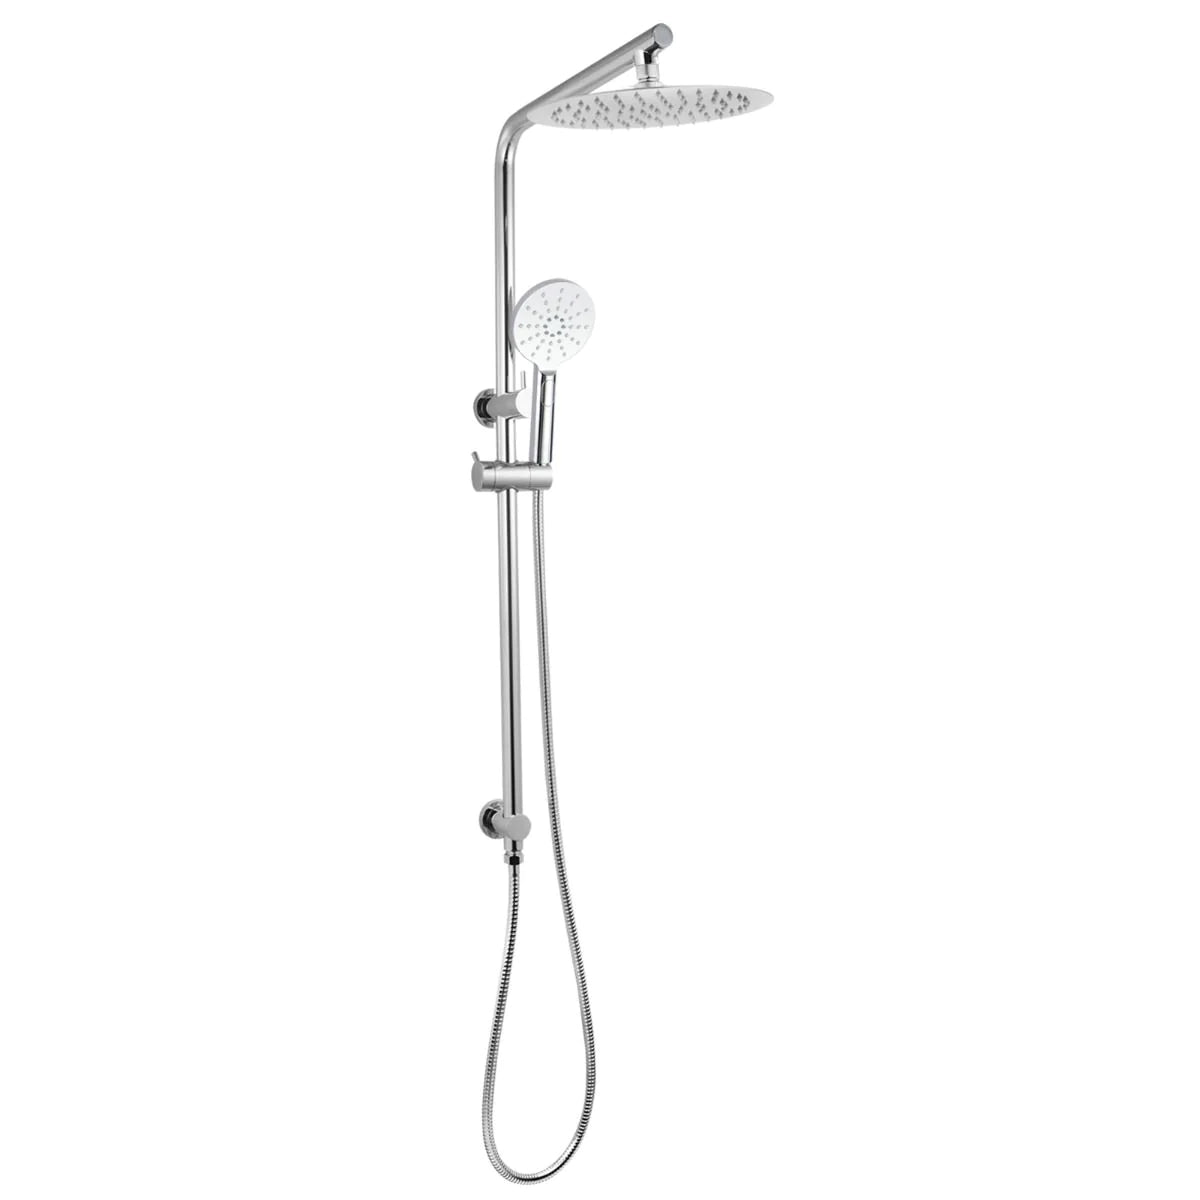 10" Right Angle Round Shower Station:Top Inlet, Modern Design-Chrome-CH2128-A-SH-N+CH0007-SH+CH-R11-HHS